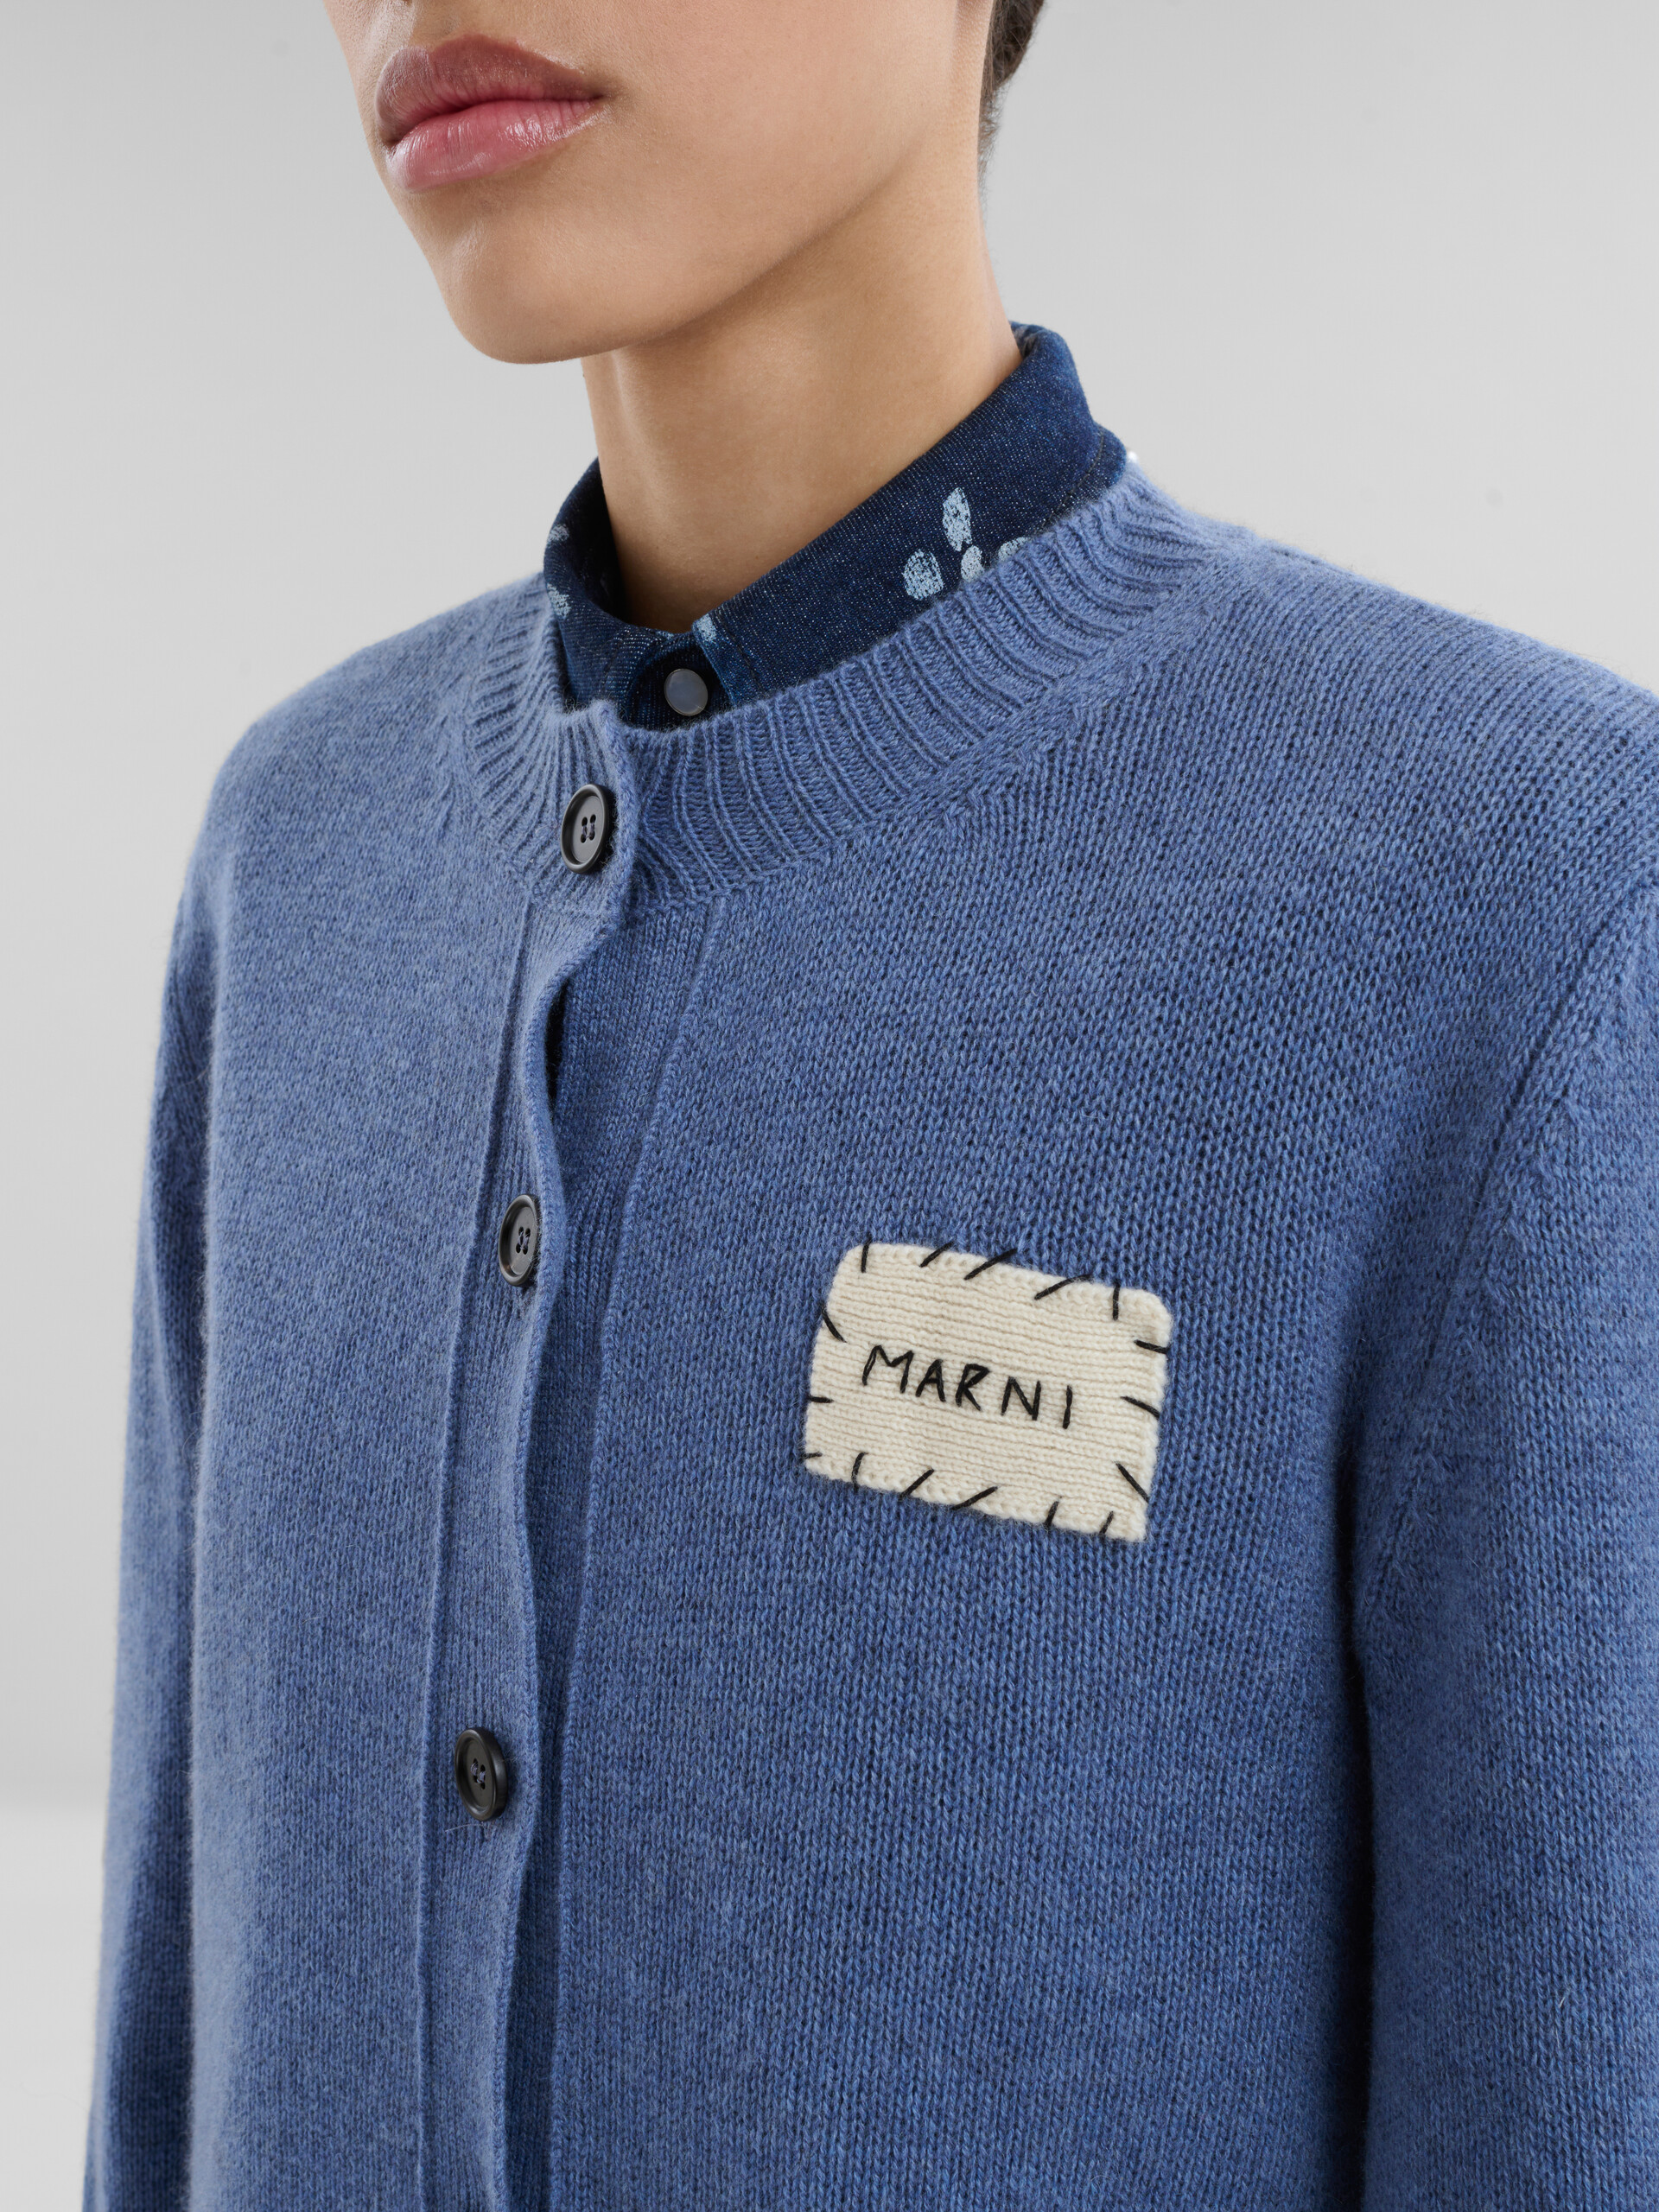 Blue cashmere cardigan with Marni patch - Pullovers - Image 4